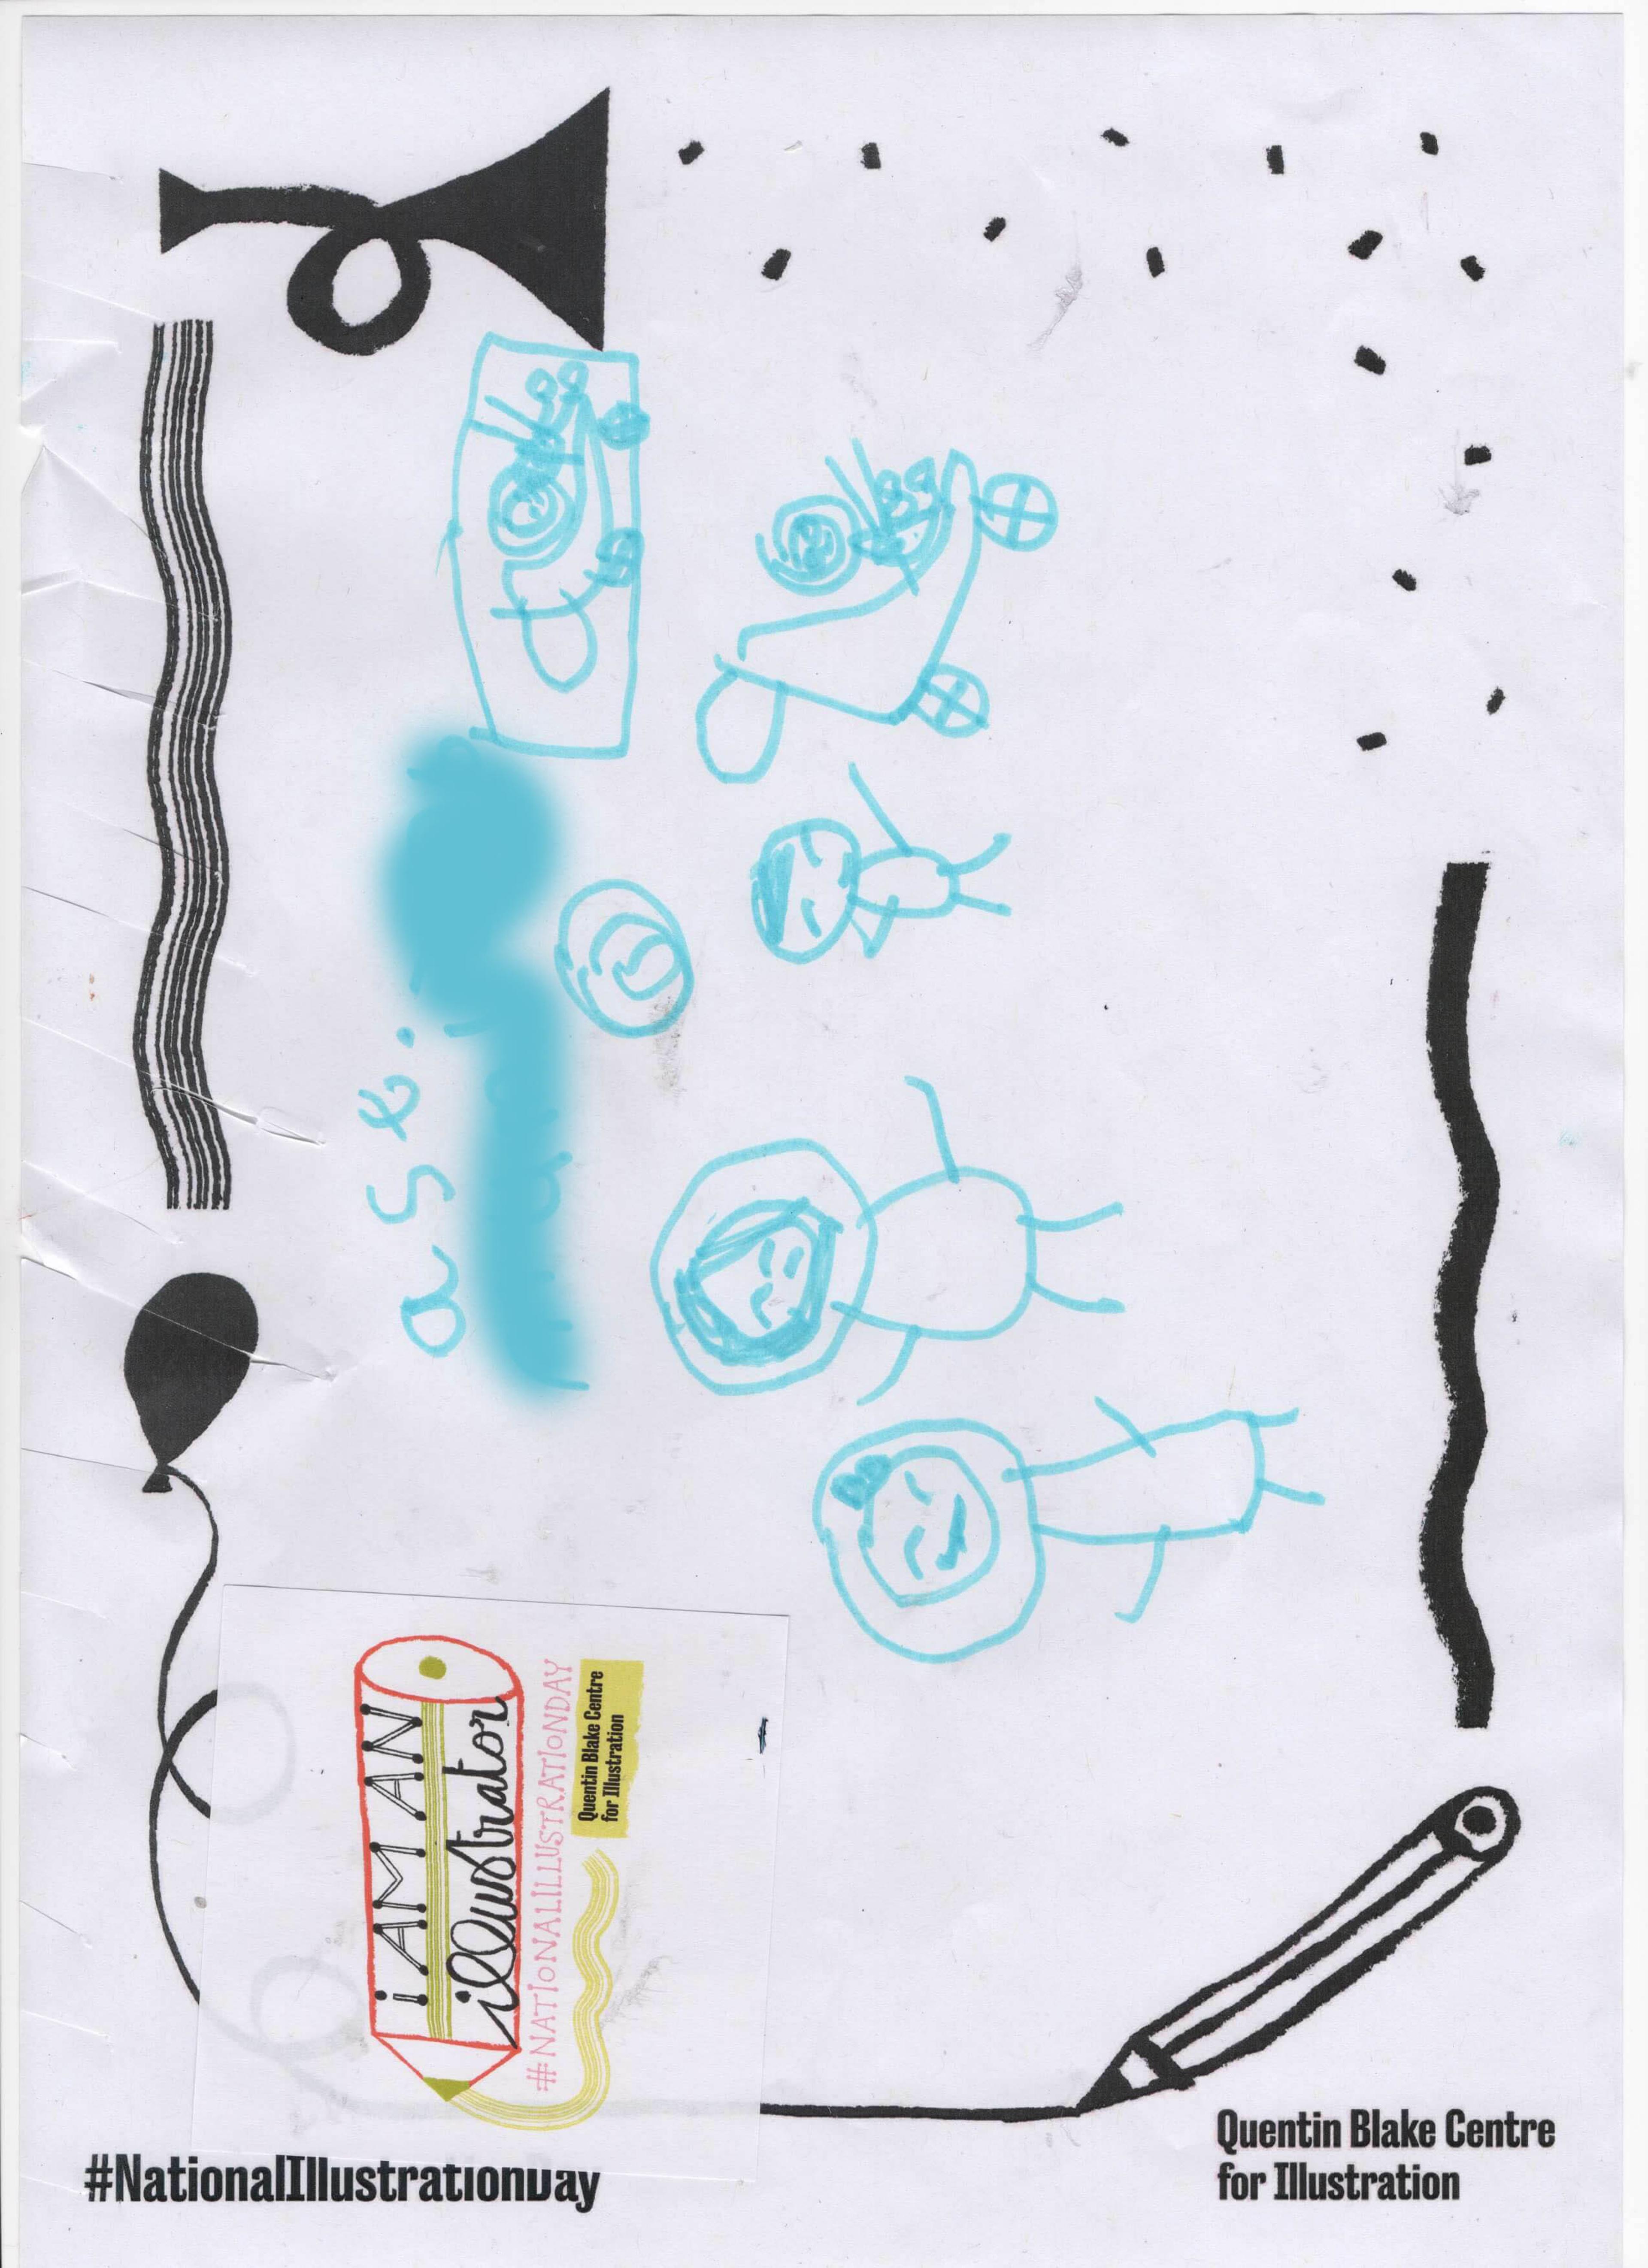 Drawing of a family with two parents, a child and two small children in prams, entirely drawn using a light blue marker